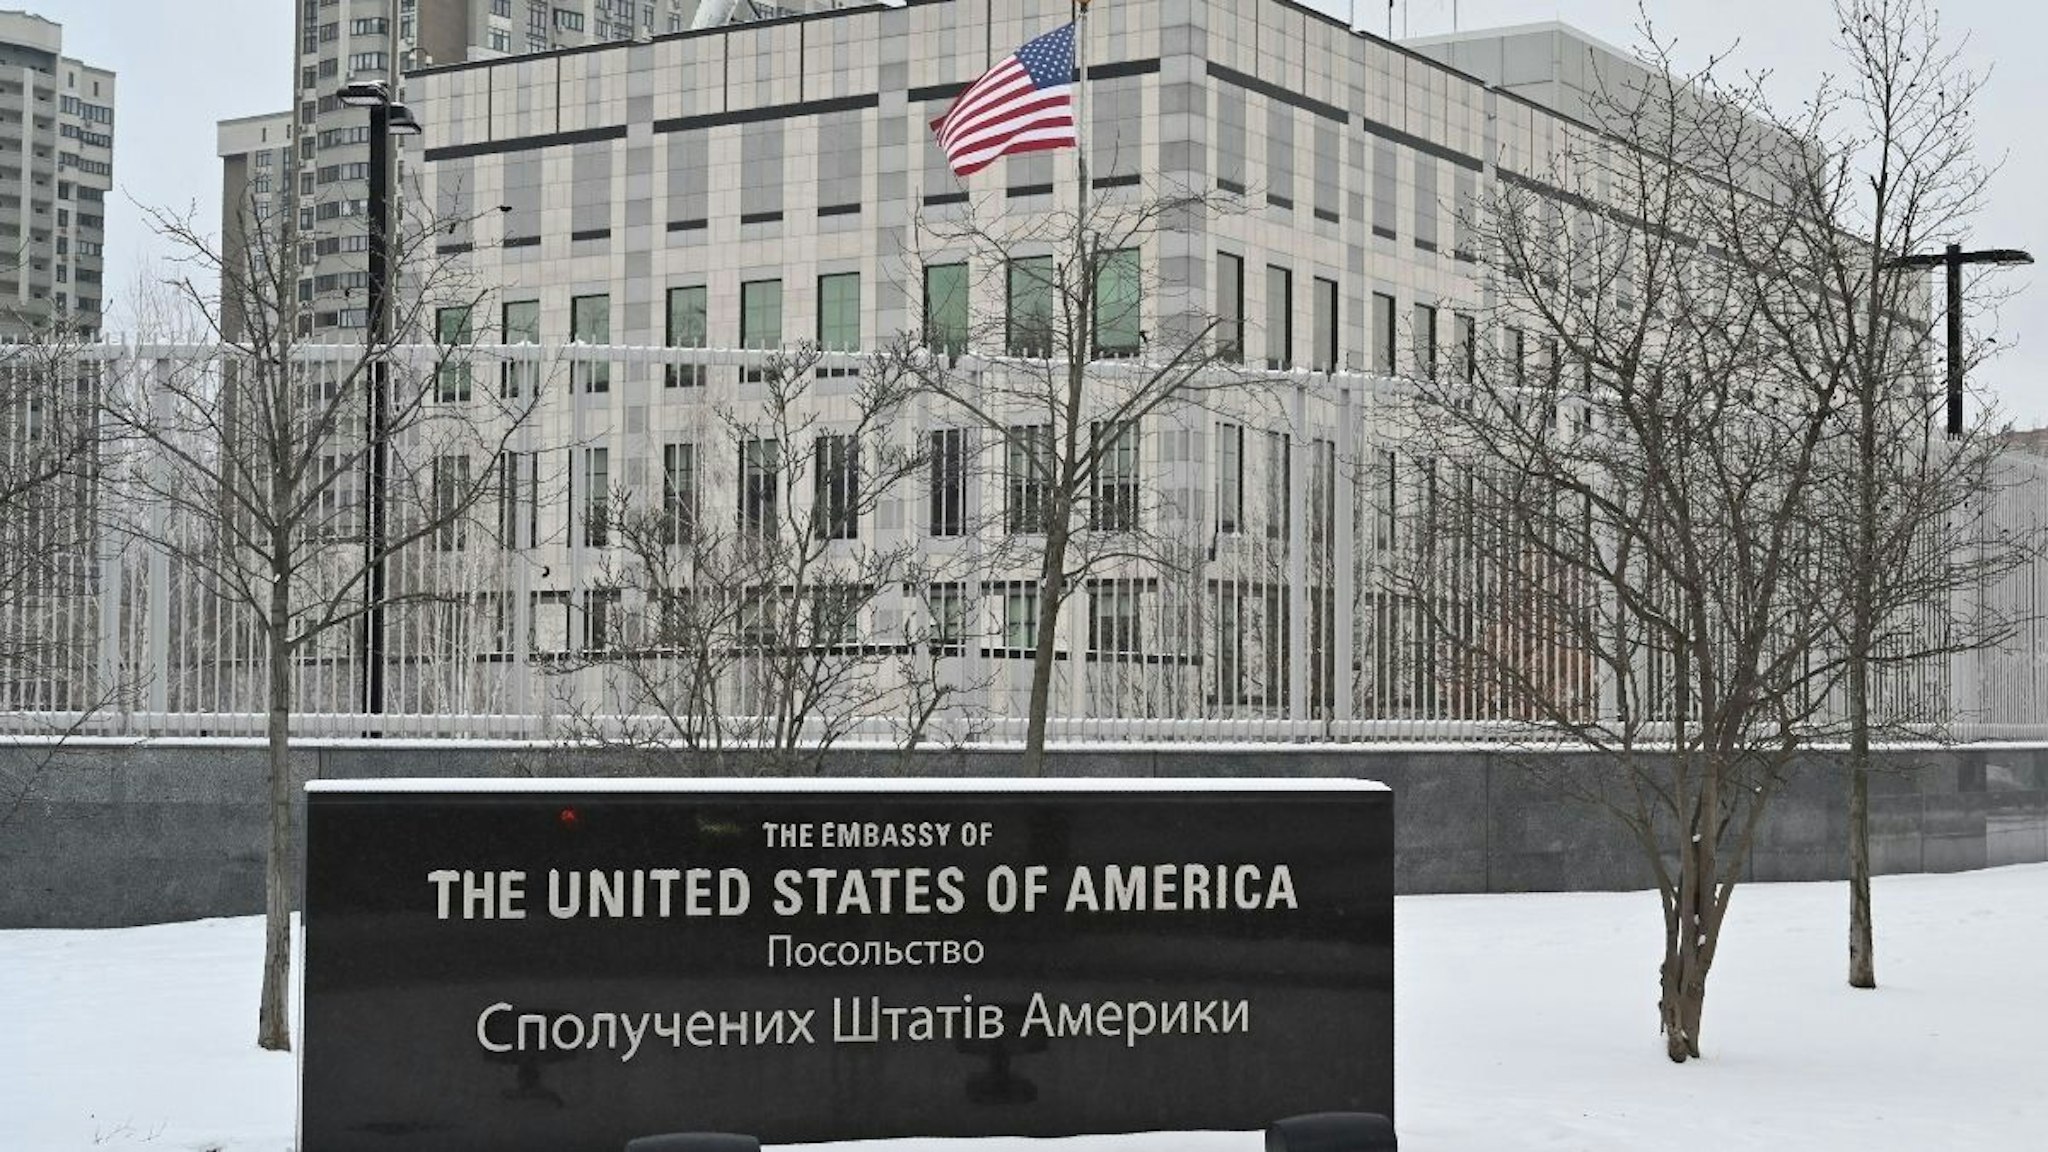 A photograph shows the US Embassy building in Kyiv, on January 24, 2022.